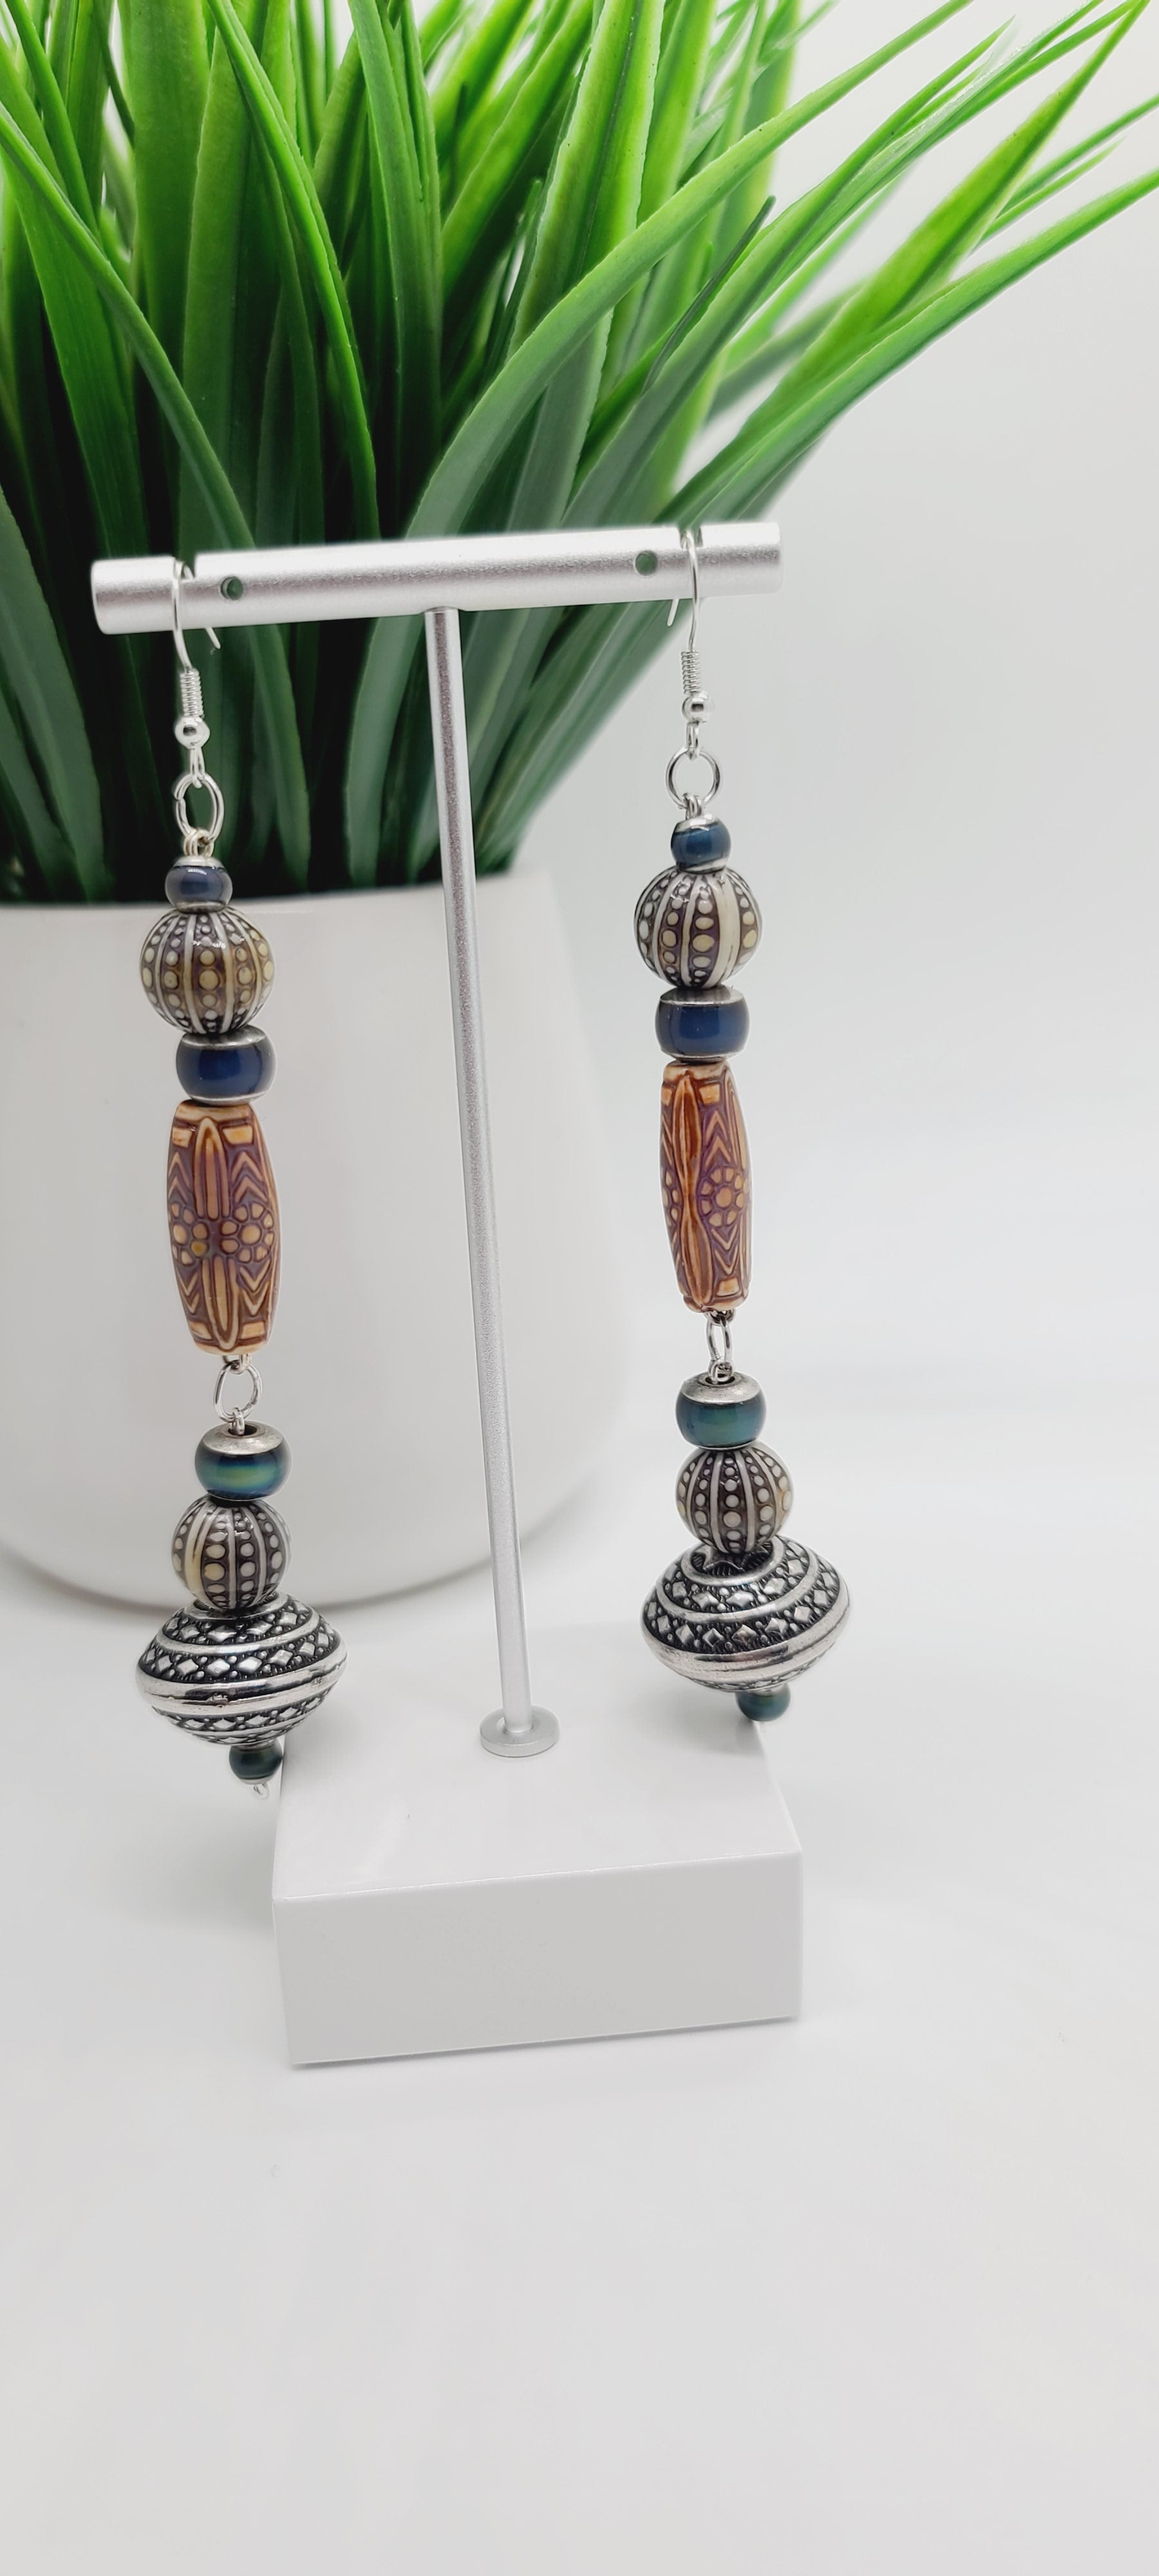 Length: 5 inches | Weight: 0.8 ounces  Distinctly You! These earrings are made with engraved silver Bicone charms, amber printed wood resin covered beads, 10mm grey and ivory printed resin beads, 3mm and 6mm green resin beads.